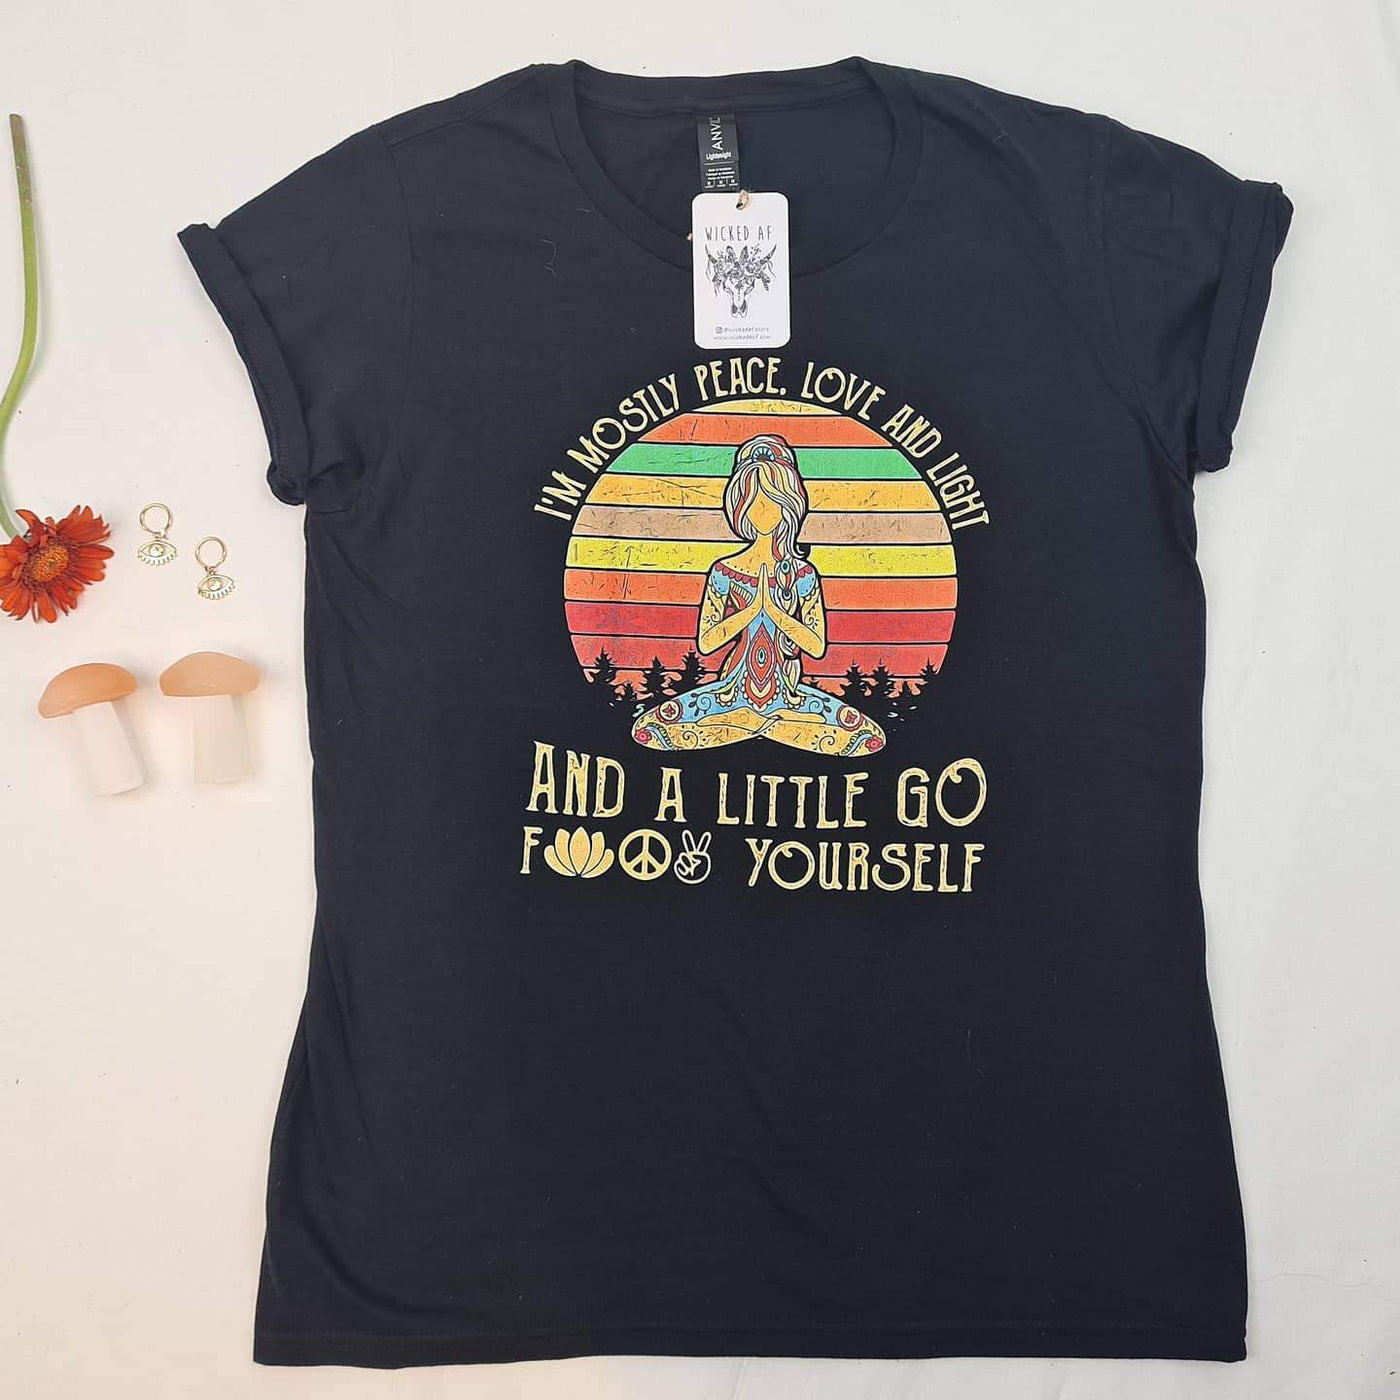 wickedafstore I'm Mostly Peace Love and Light T-shirt